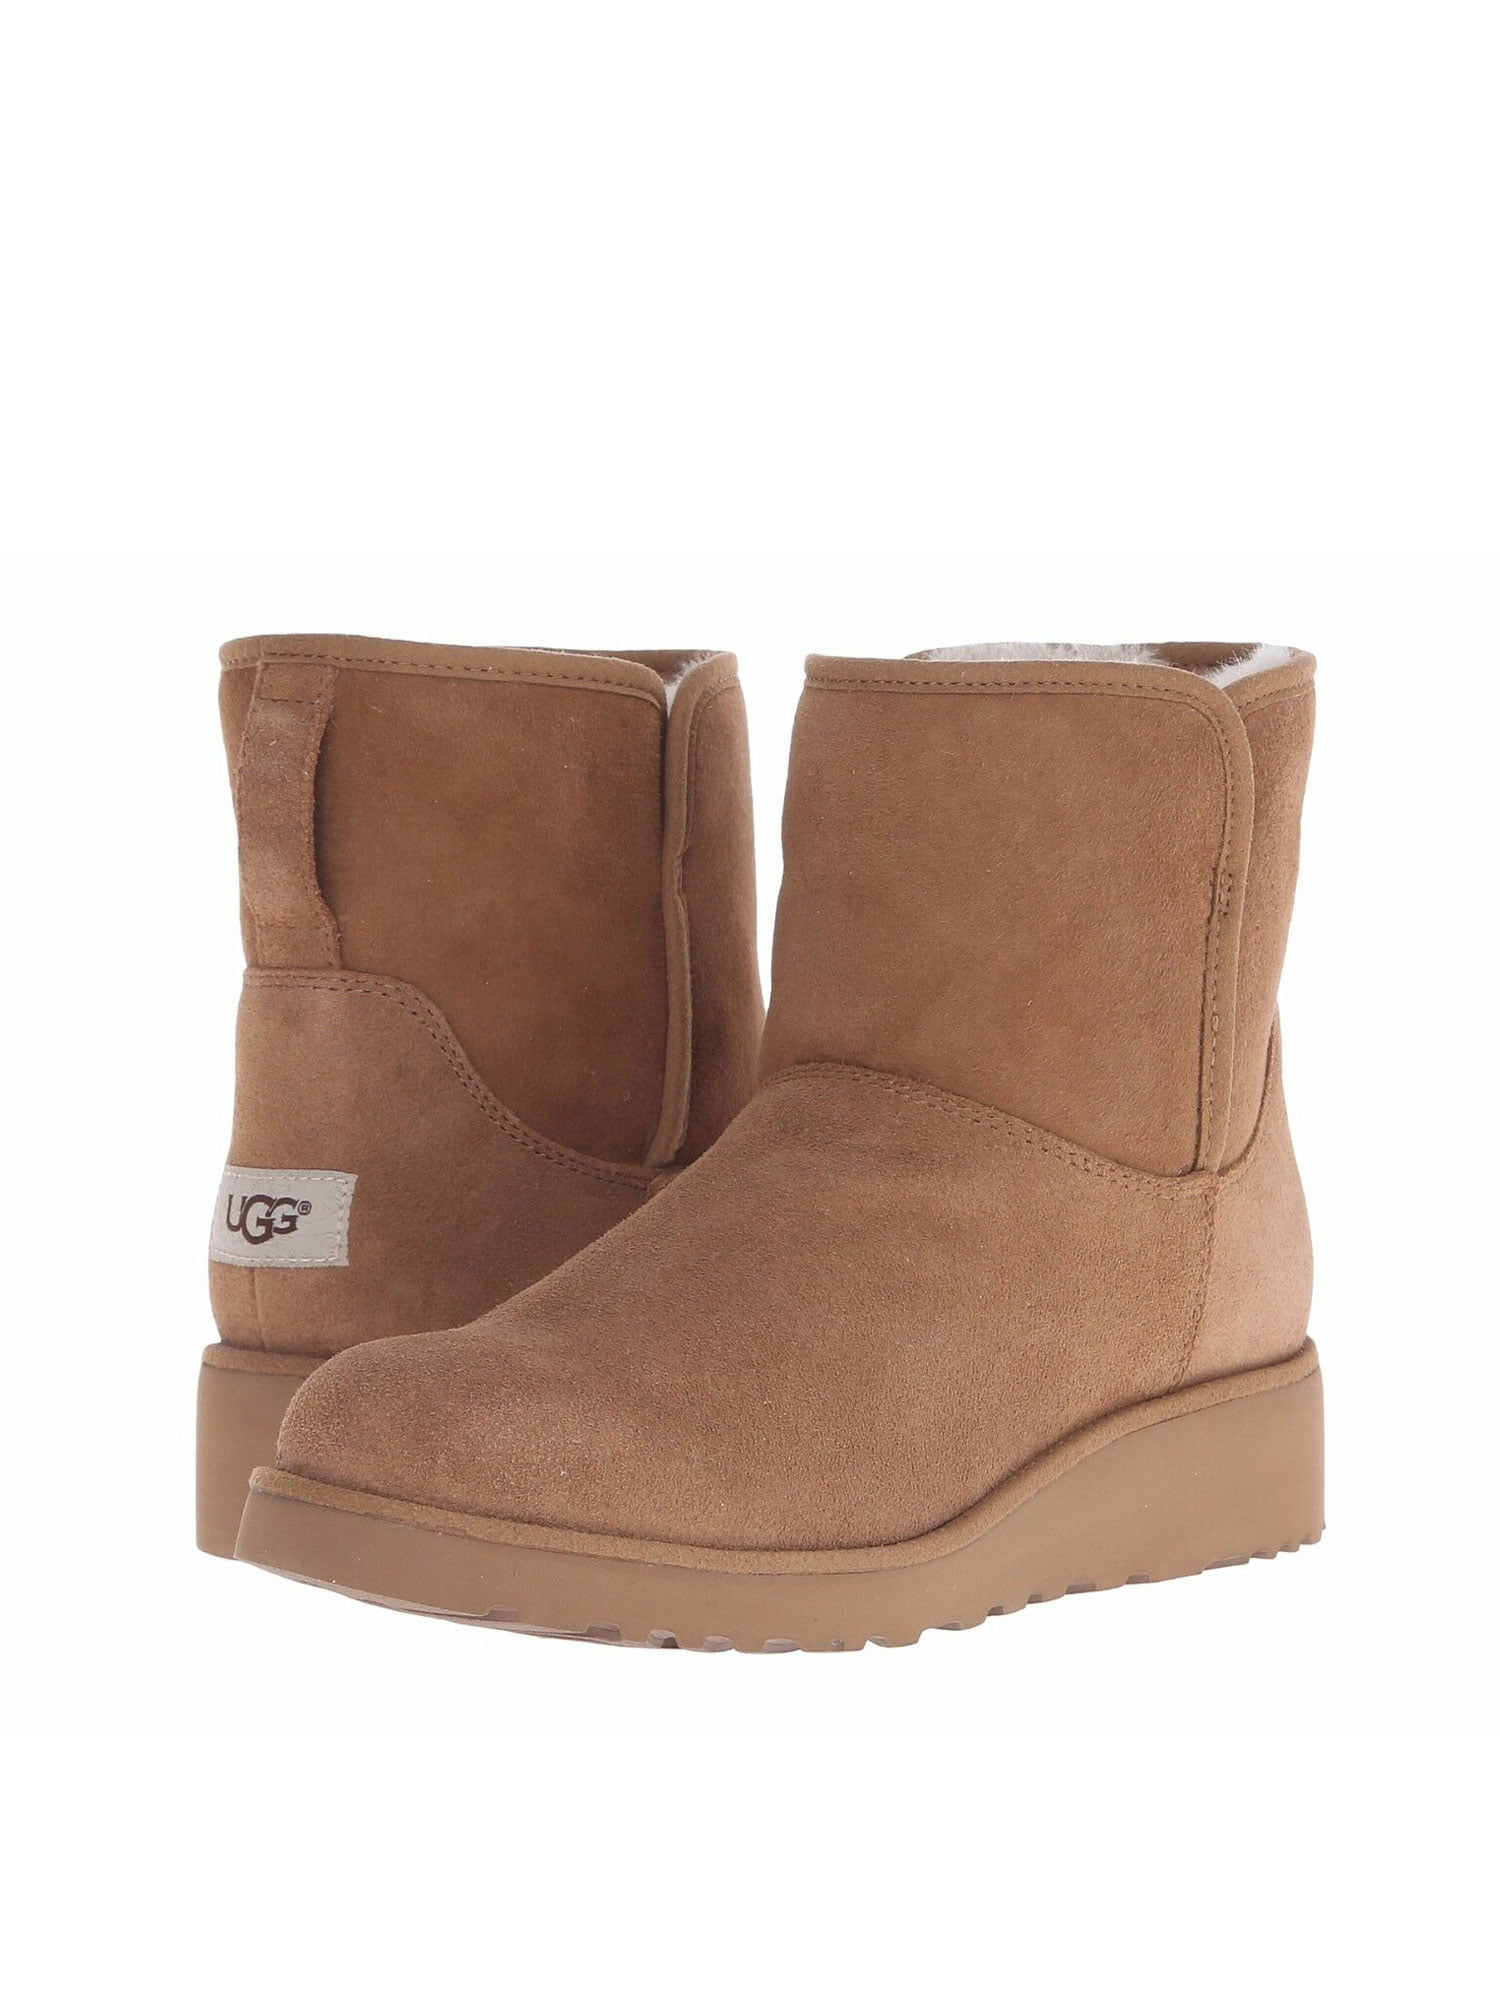 ugg classic slim collection